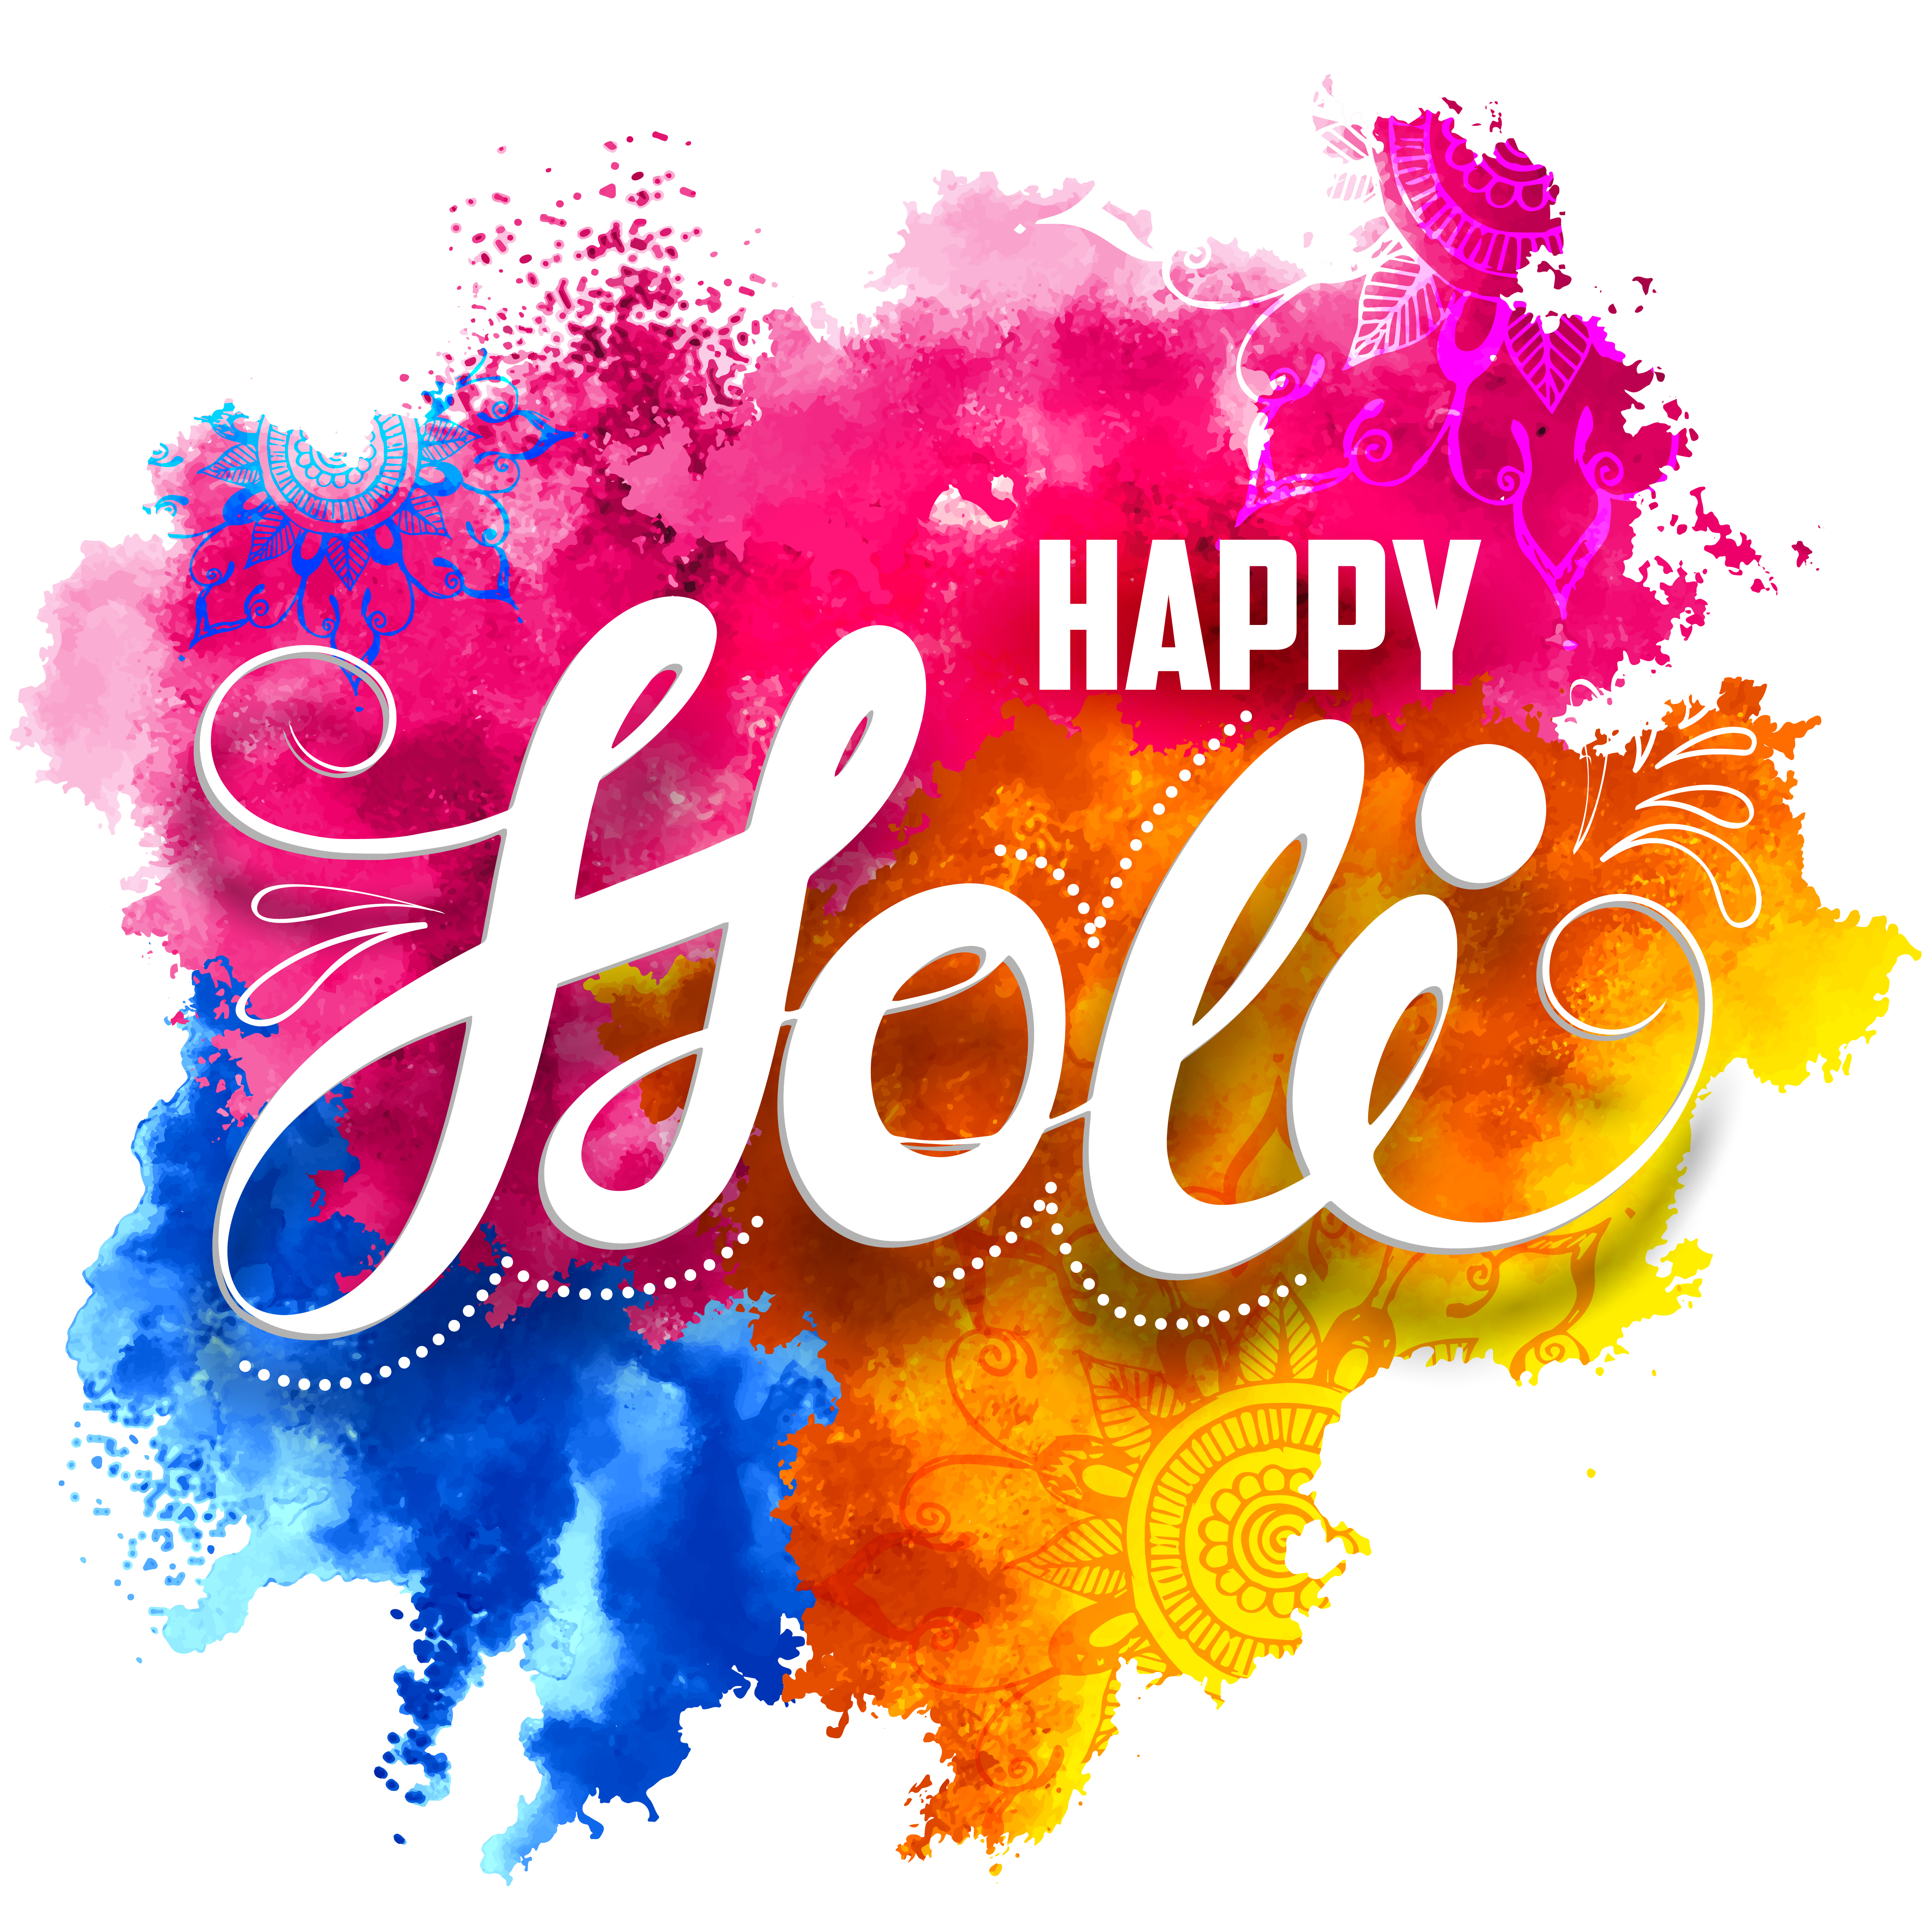 Wishing you all a Happy Holi from the DIDM family